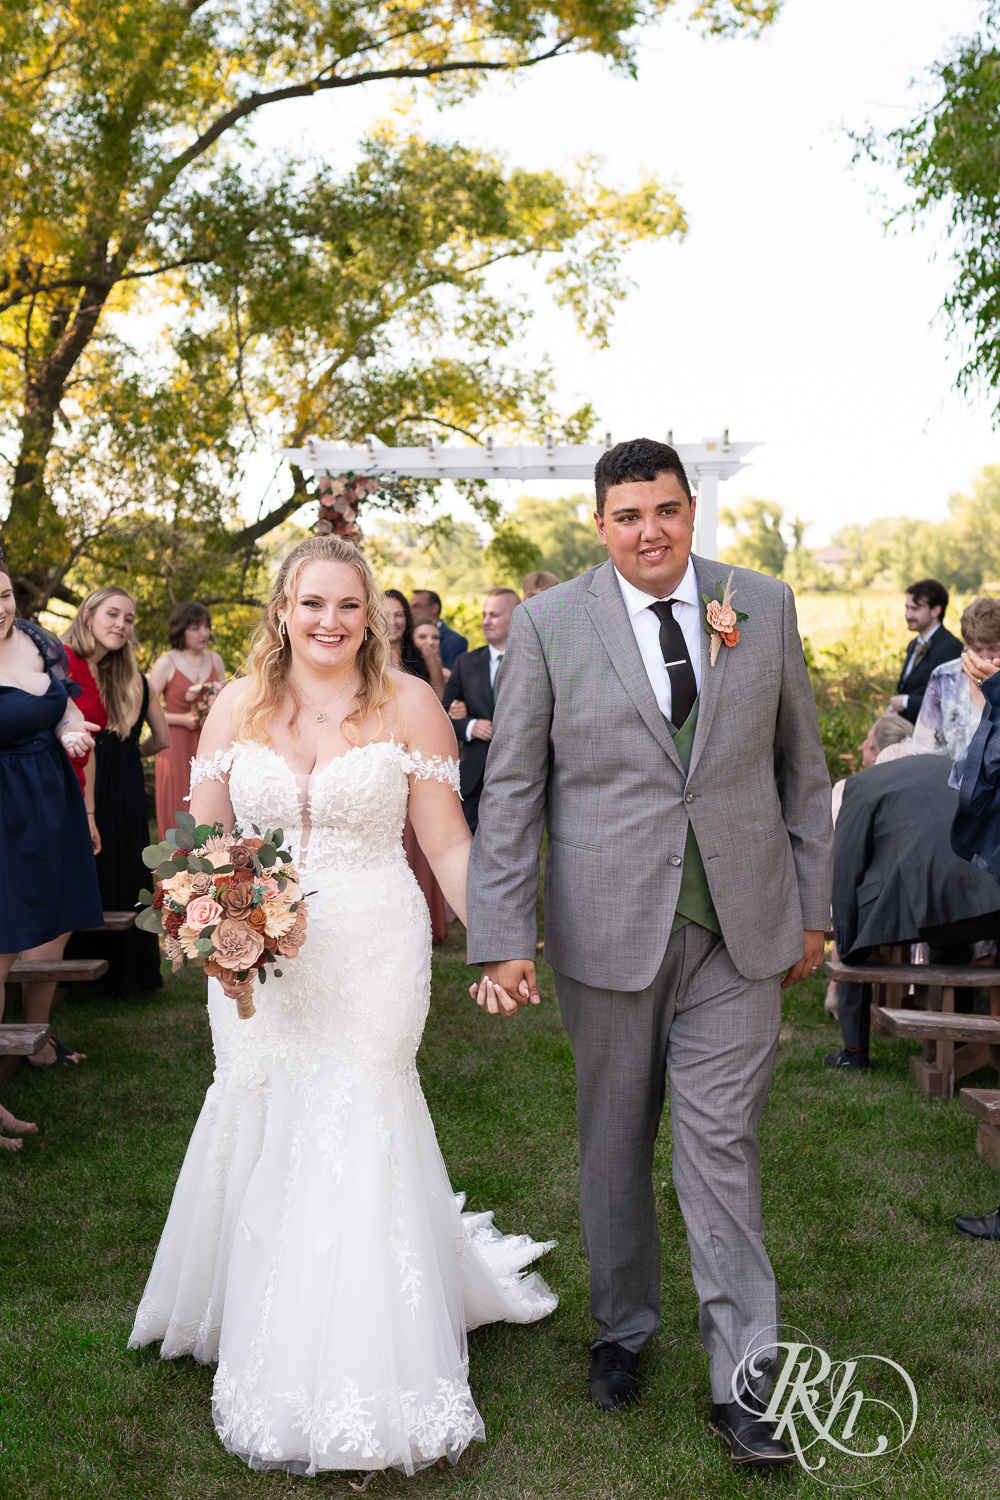 Bride and groom smile during summer wedding ceremony at Cottage Farmhouse in Glencoe, Minnesota.